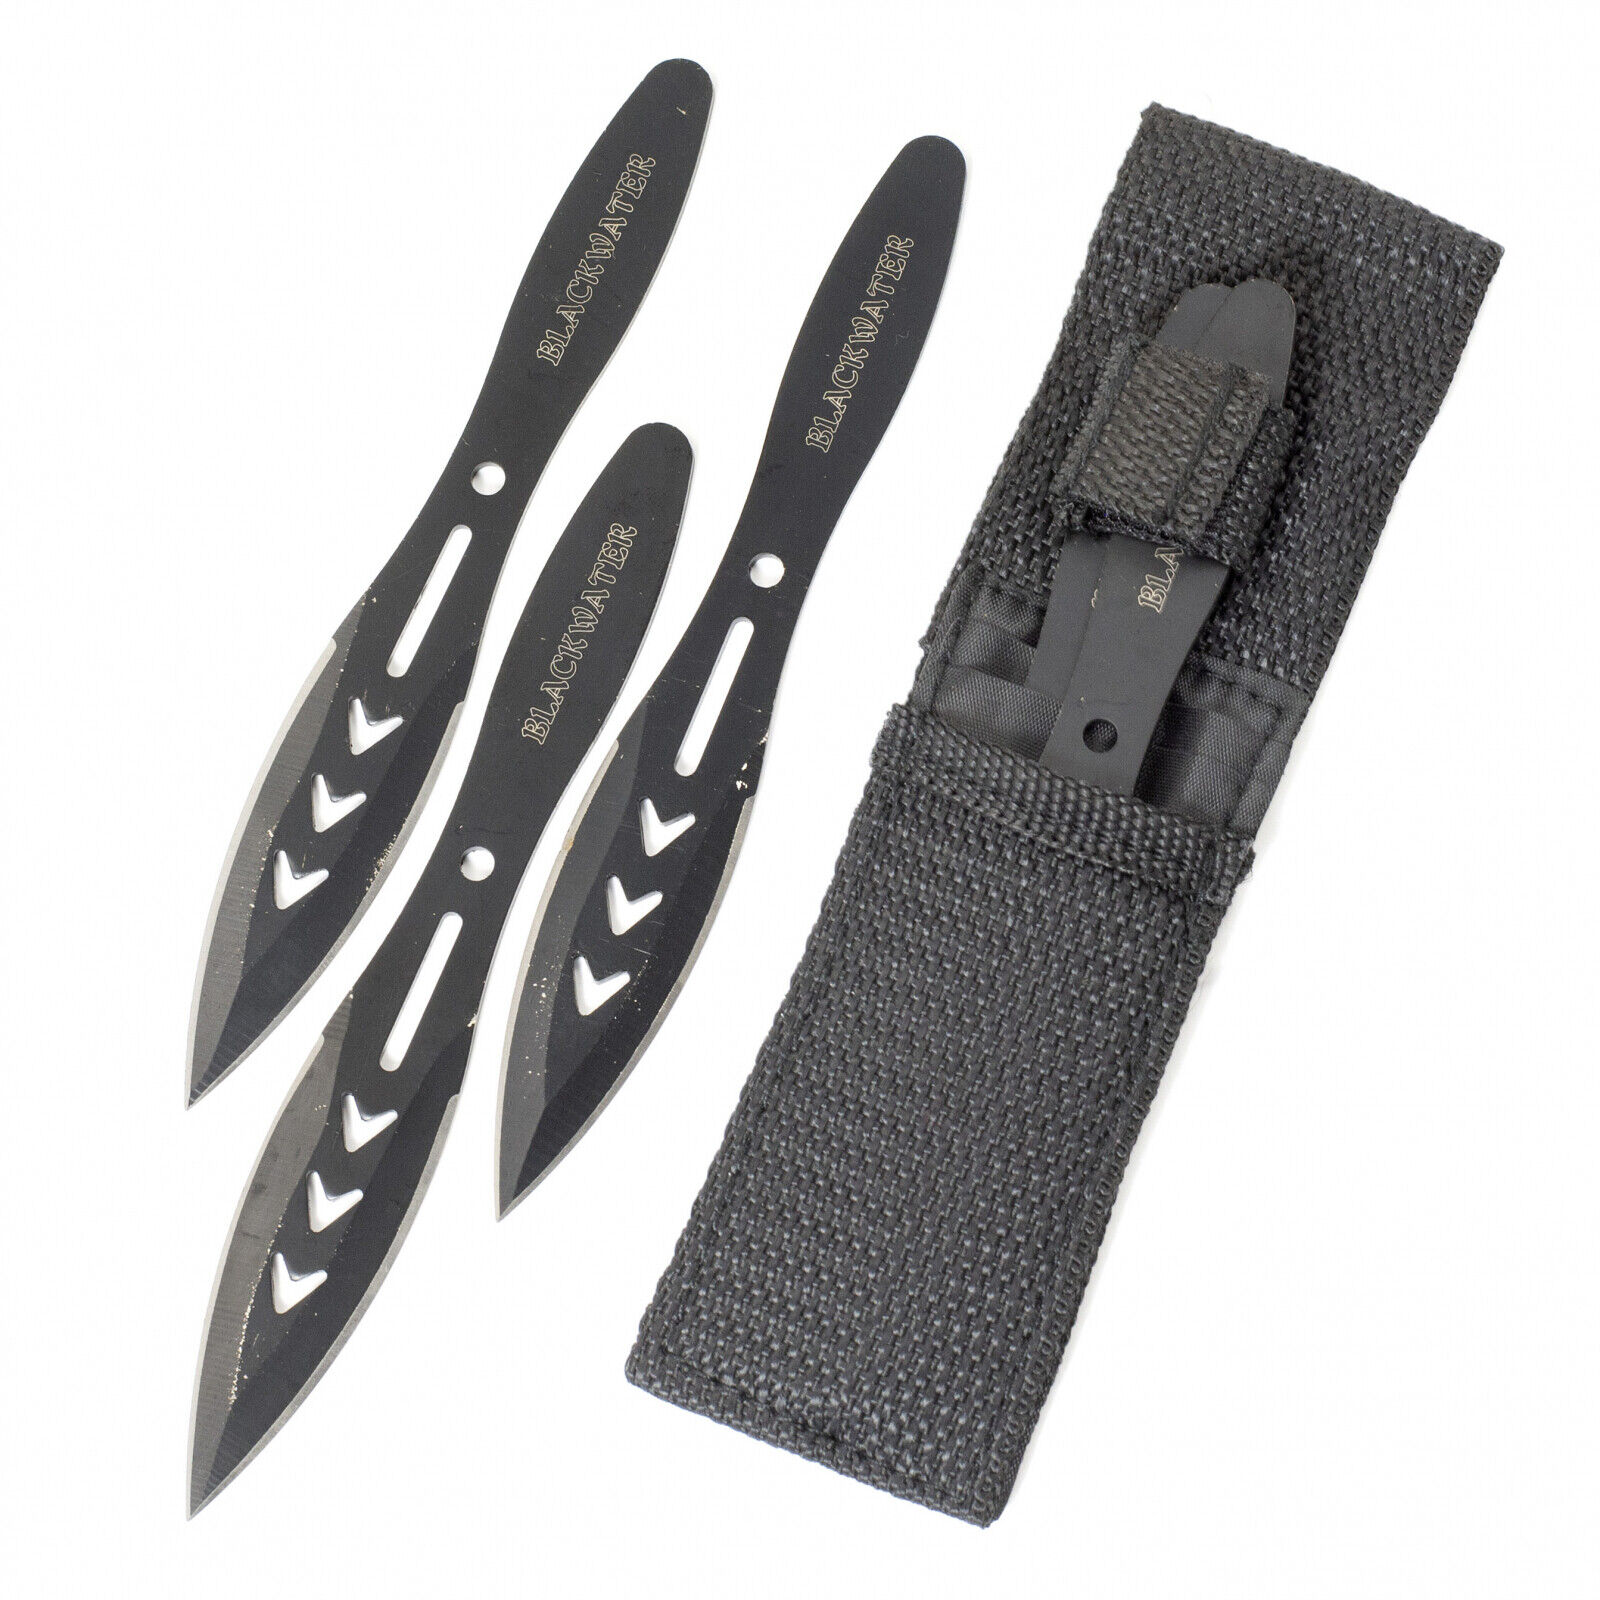 3 Piece Professional ASR Tactical Black Stainless Steel Throwing Knife Set